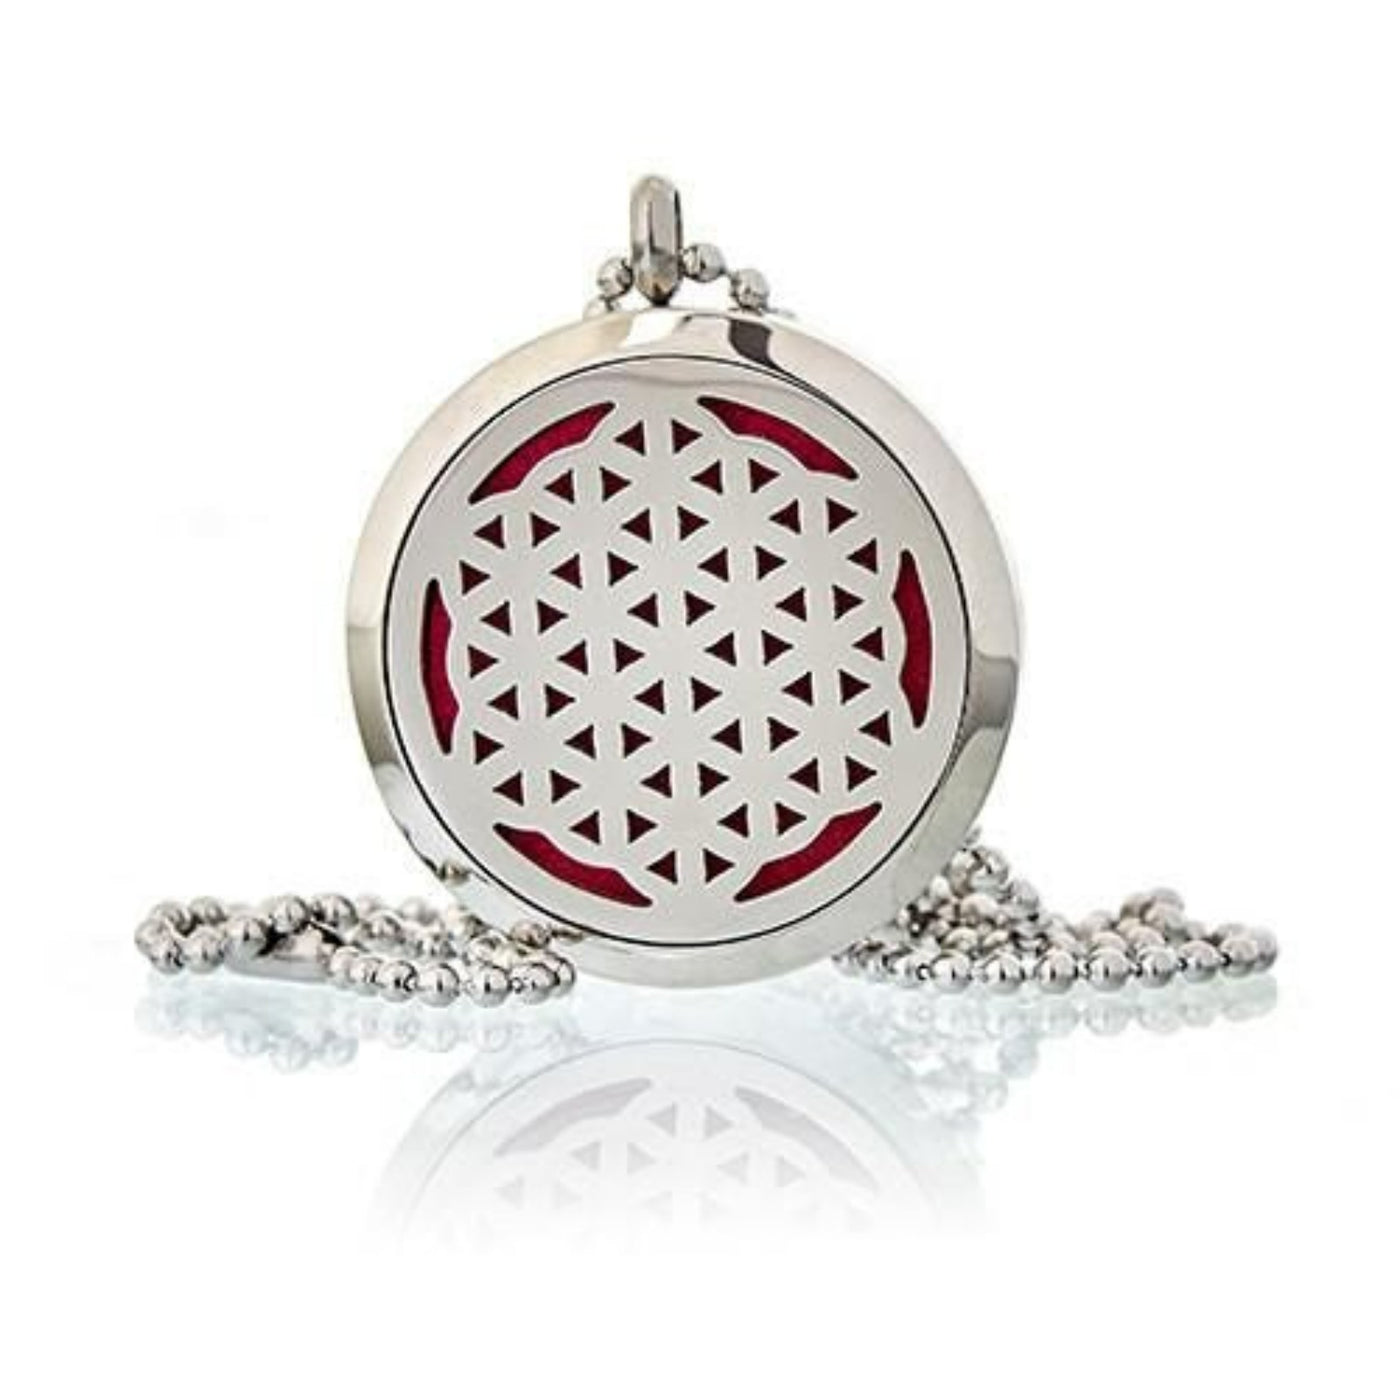 Aromatherapy Diffuser Flower of Life Necklace - 30mm.